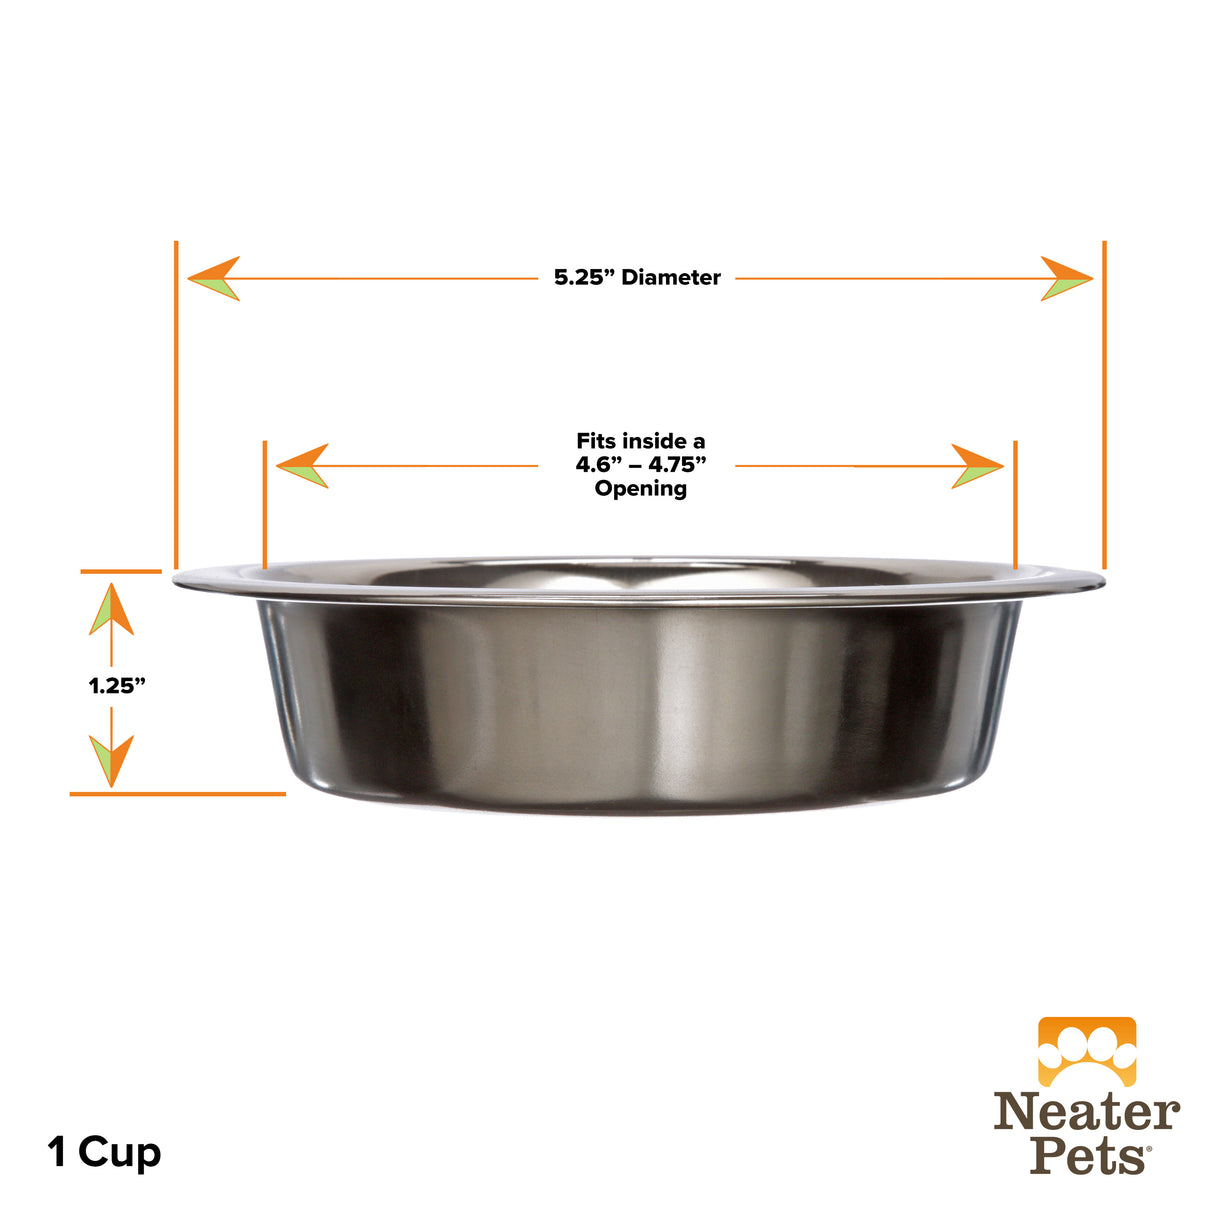 Neater Pet Brands Big Bowl - Champagne Bowl